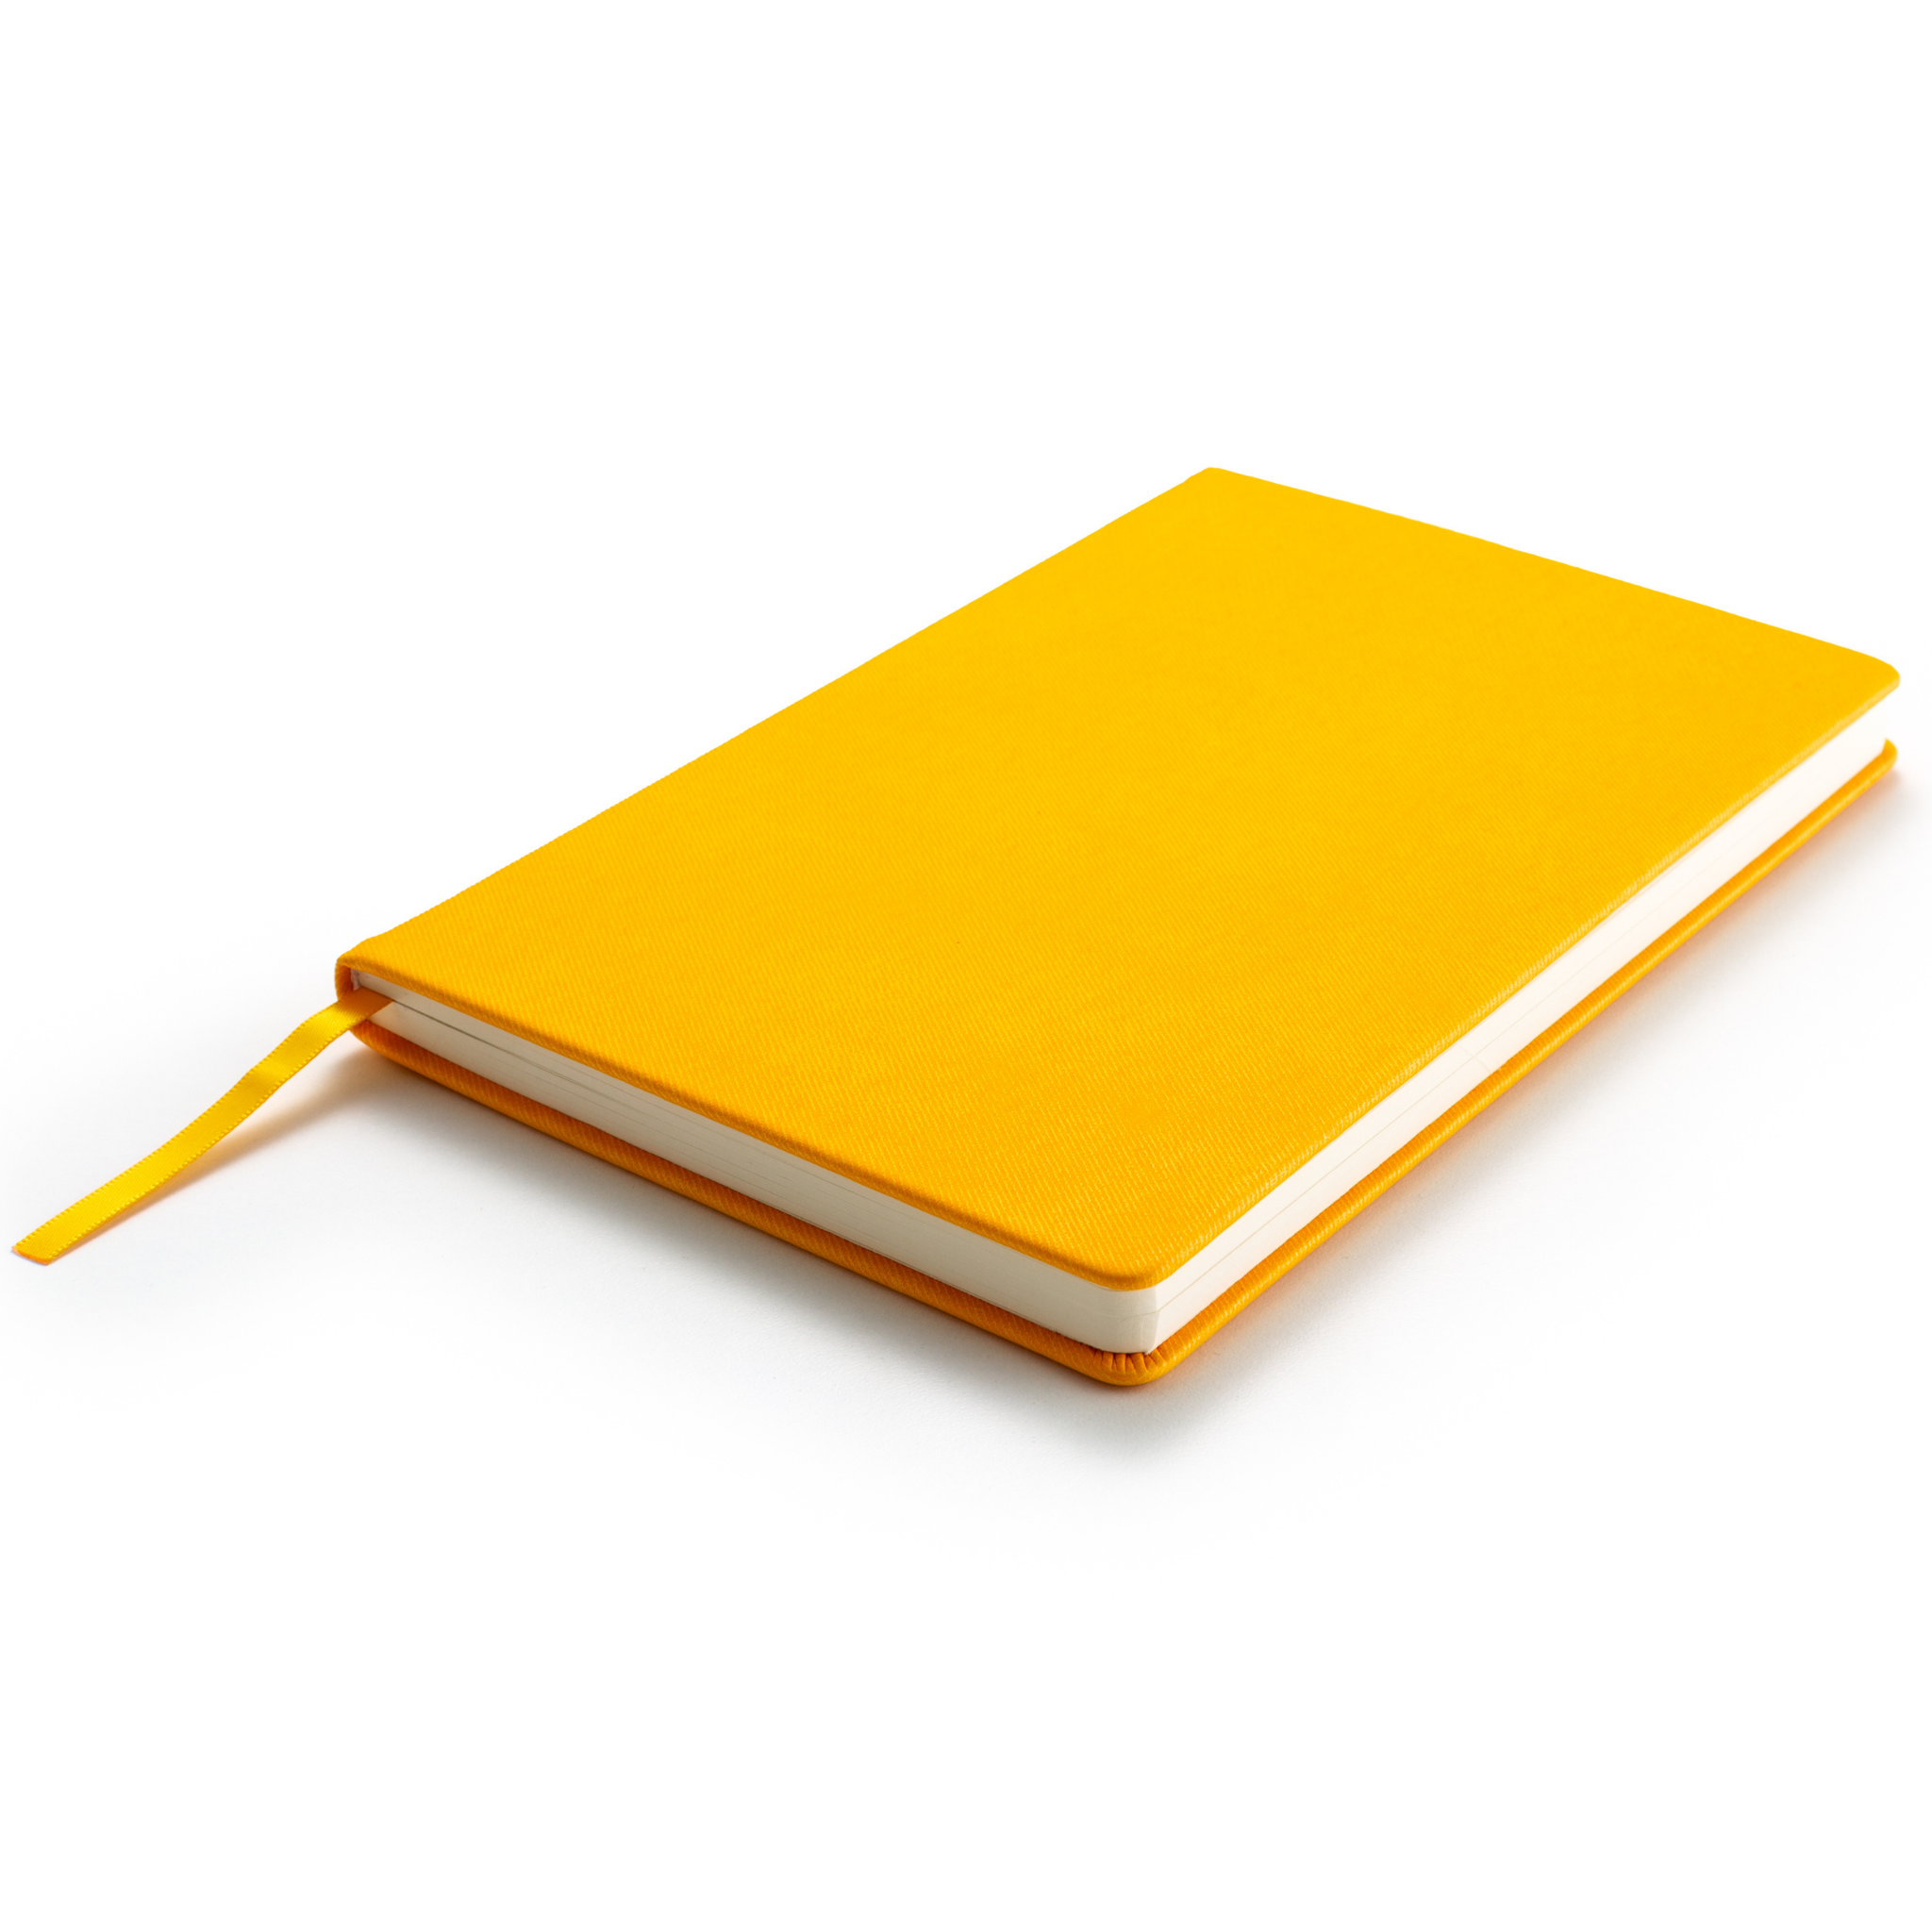 Yellow For Bullet Journal Kit A5 Hardcover Notebook Thick 120g